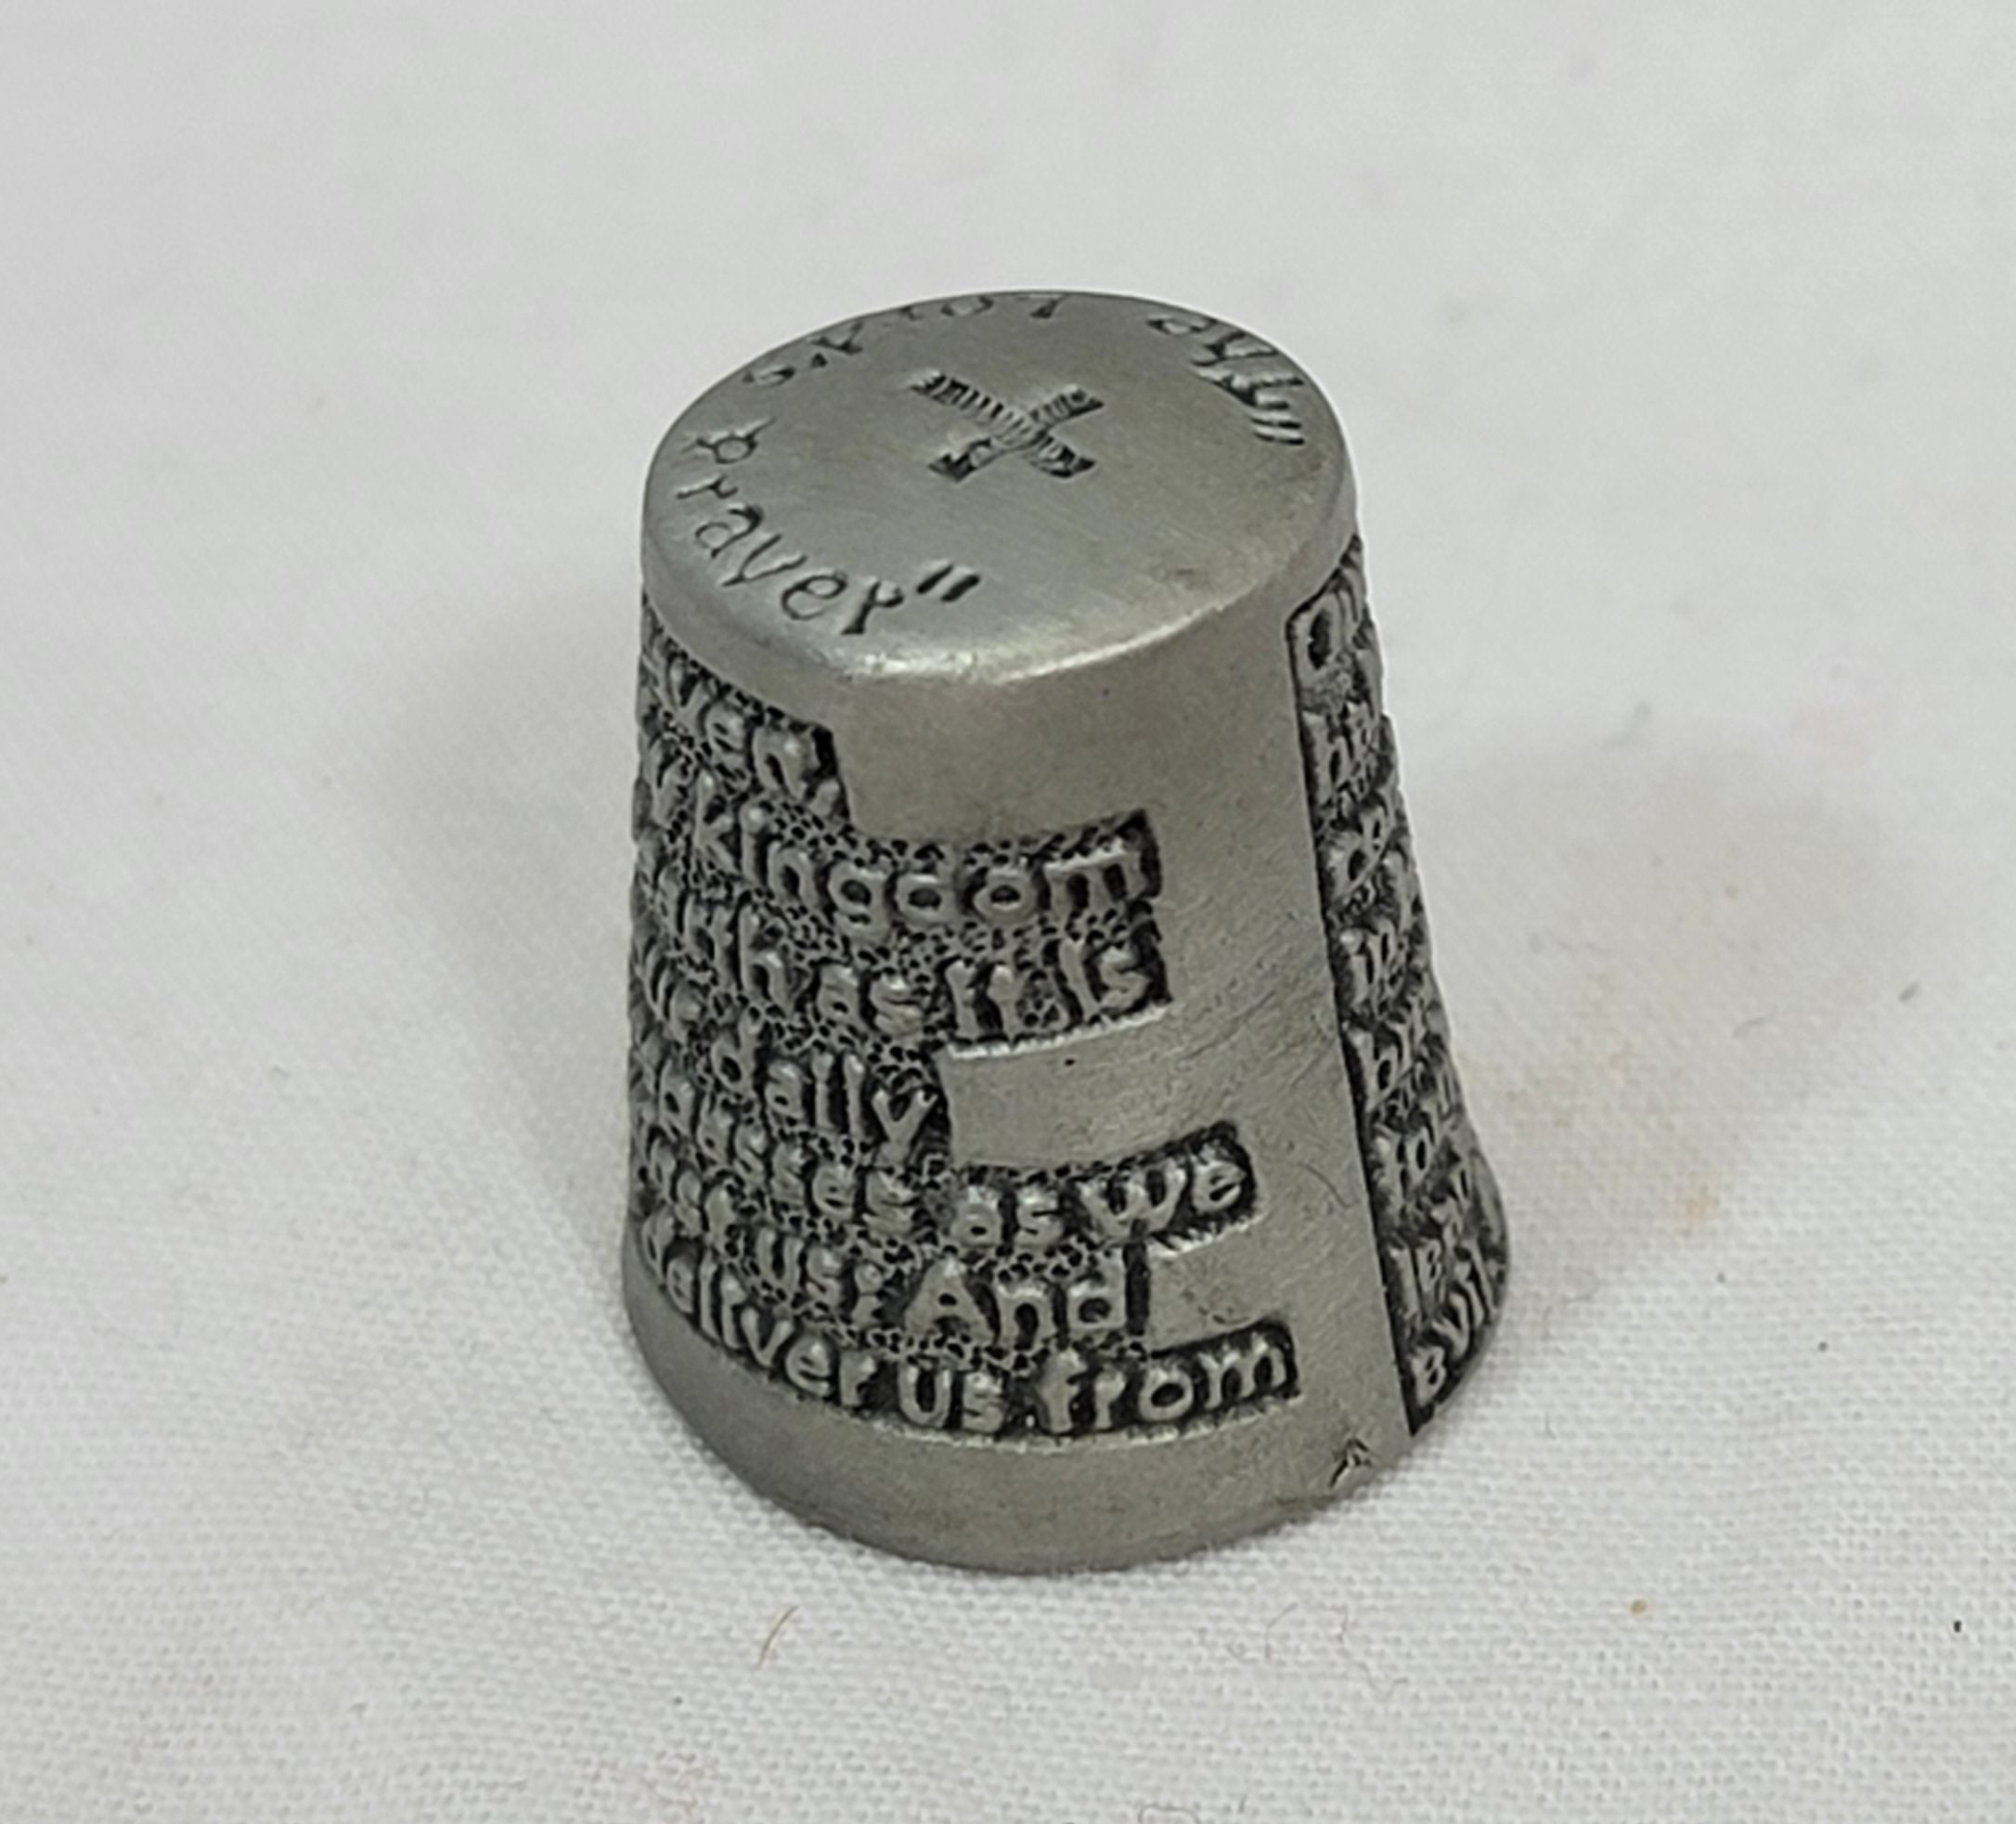 Notions - Colonial Under Thimble # SM200